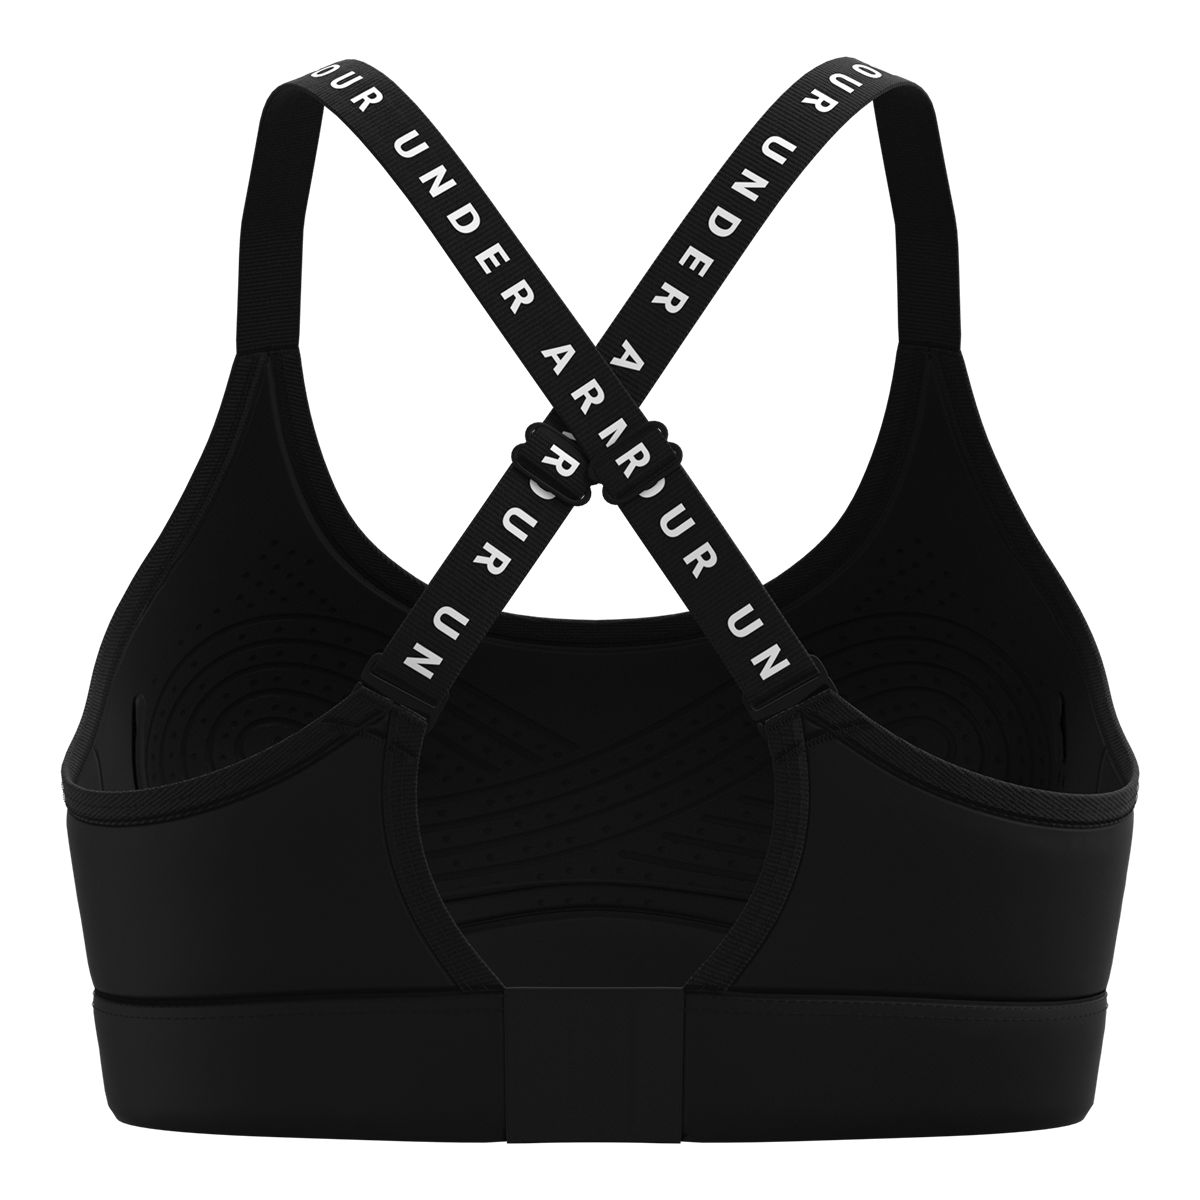 Under Armour Under Armor Sports Bra SIZE S? - $10 - From My